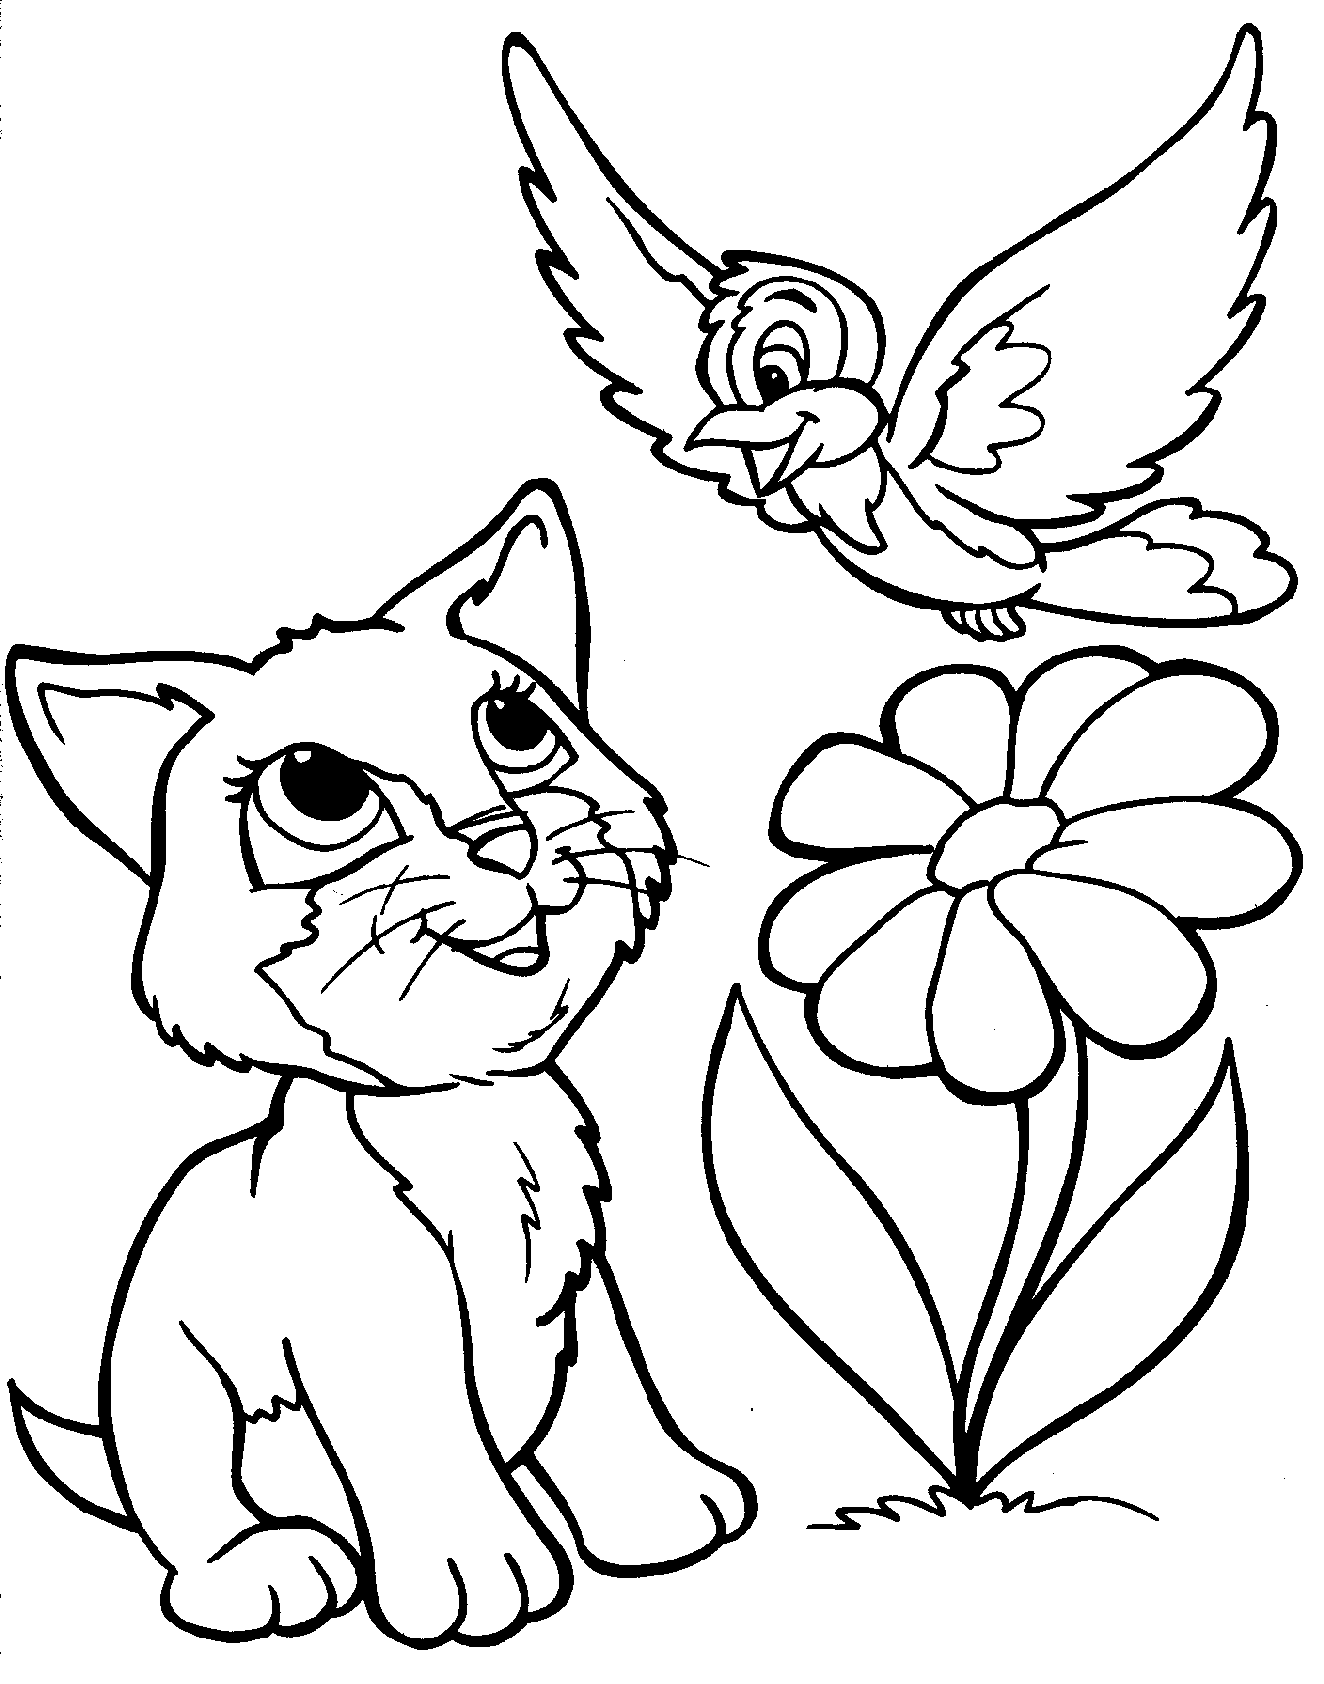 Kitten Animal Coloring Pictures